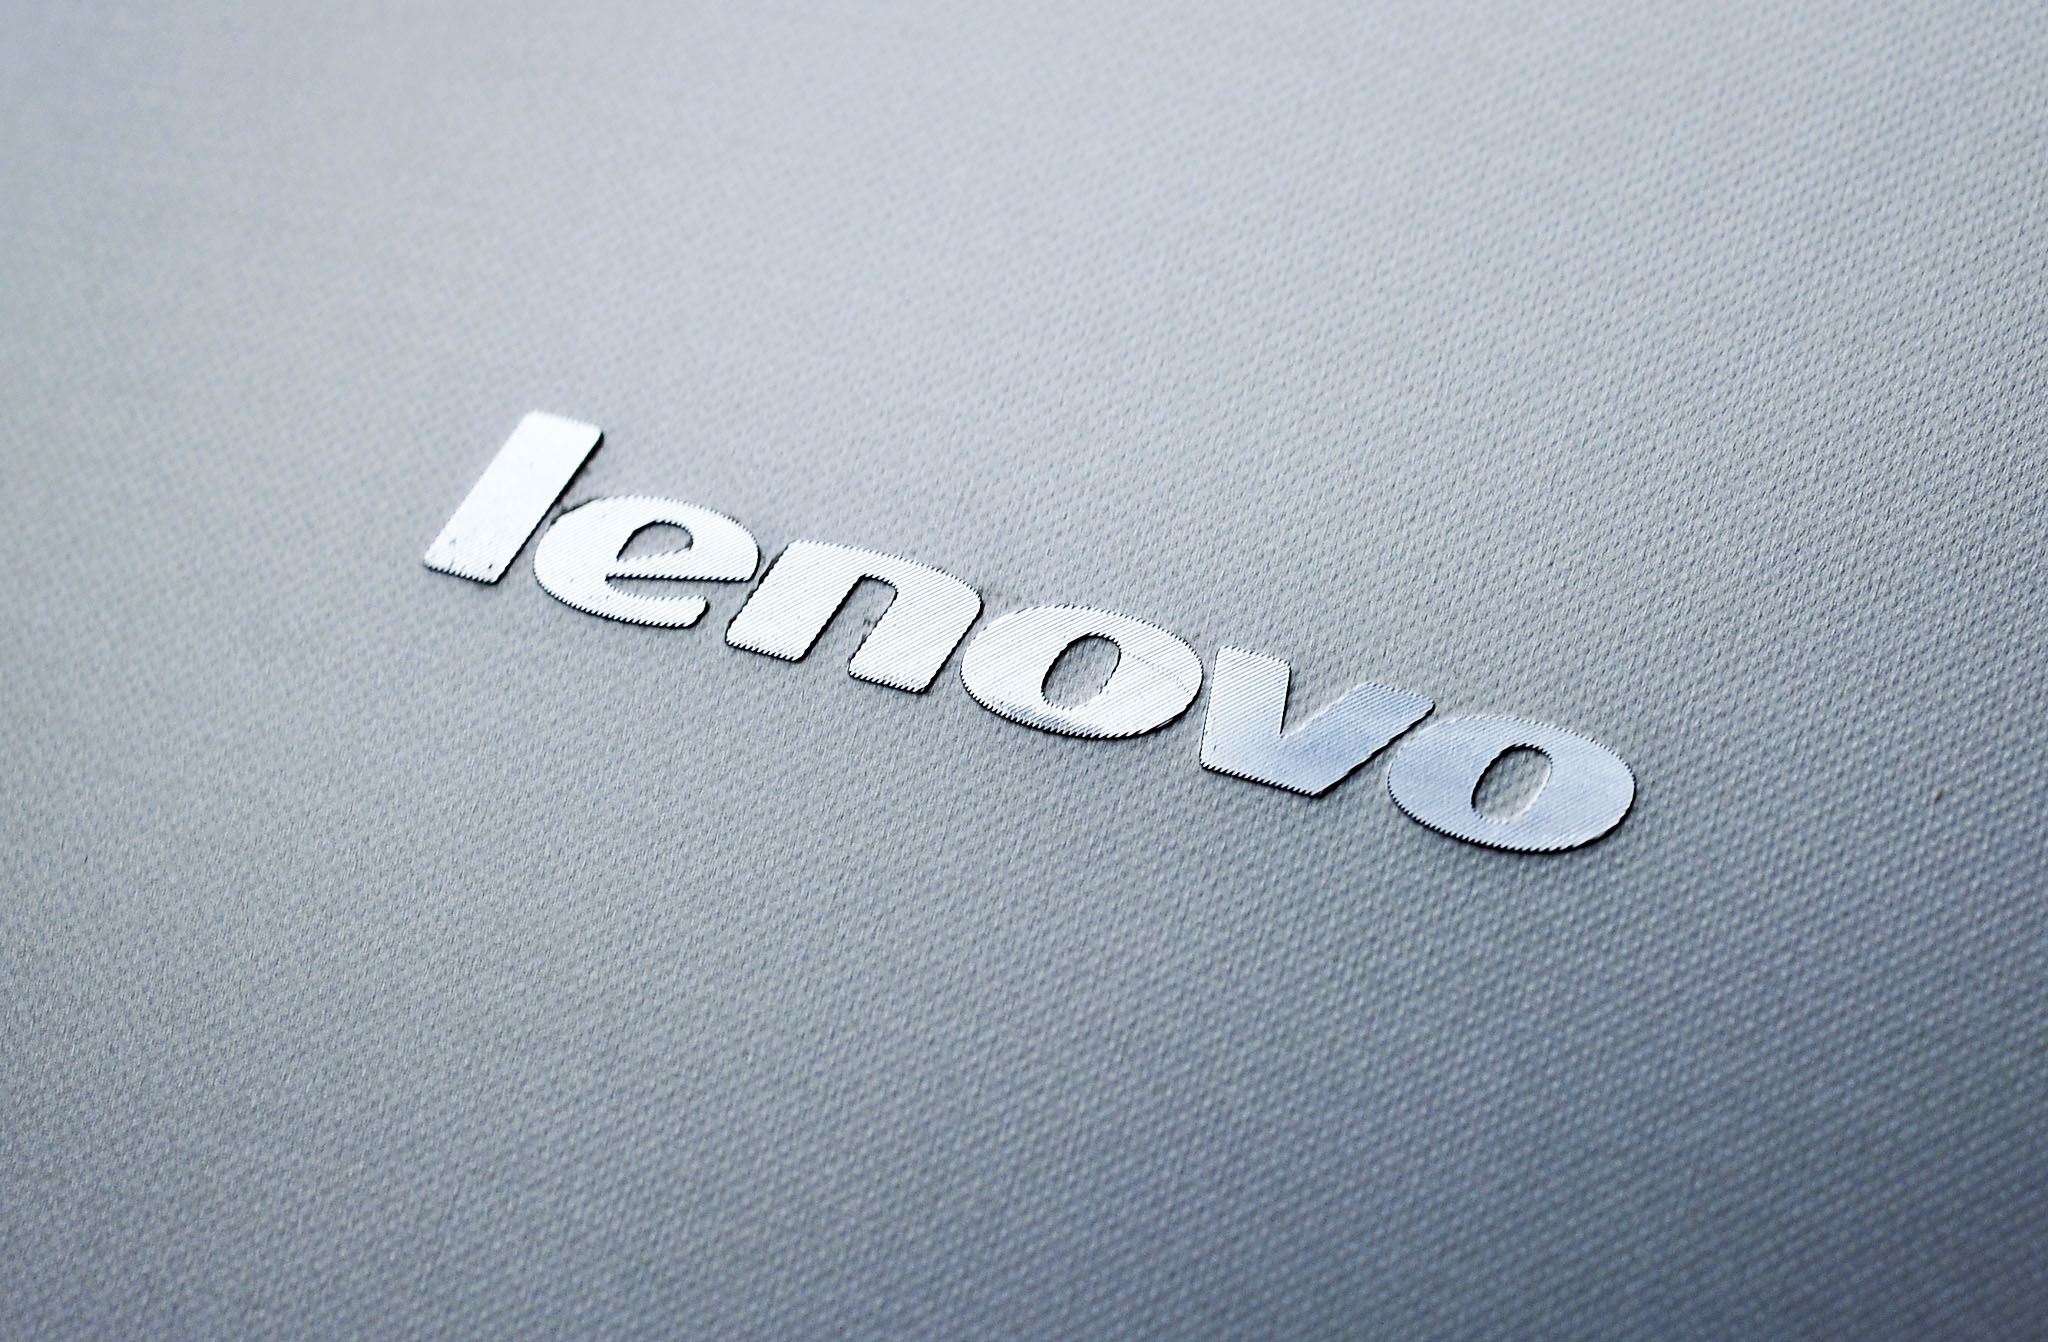 Lenovo once again reminds everyone why it's better to get a Mac